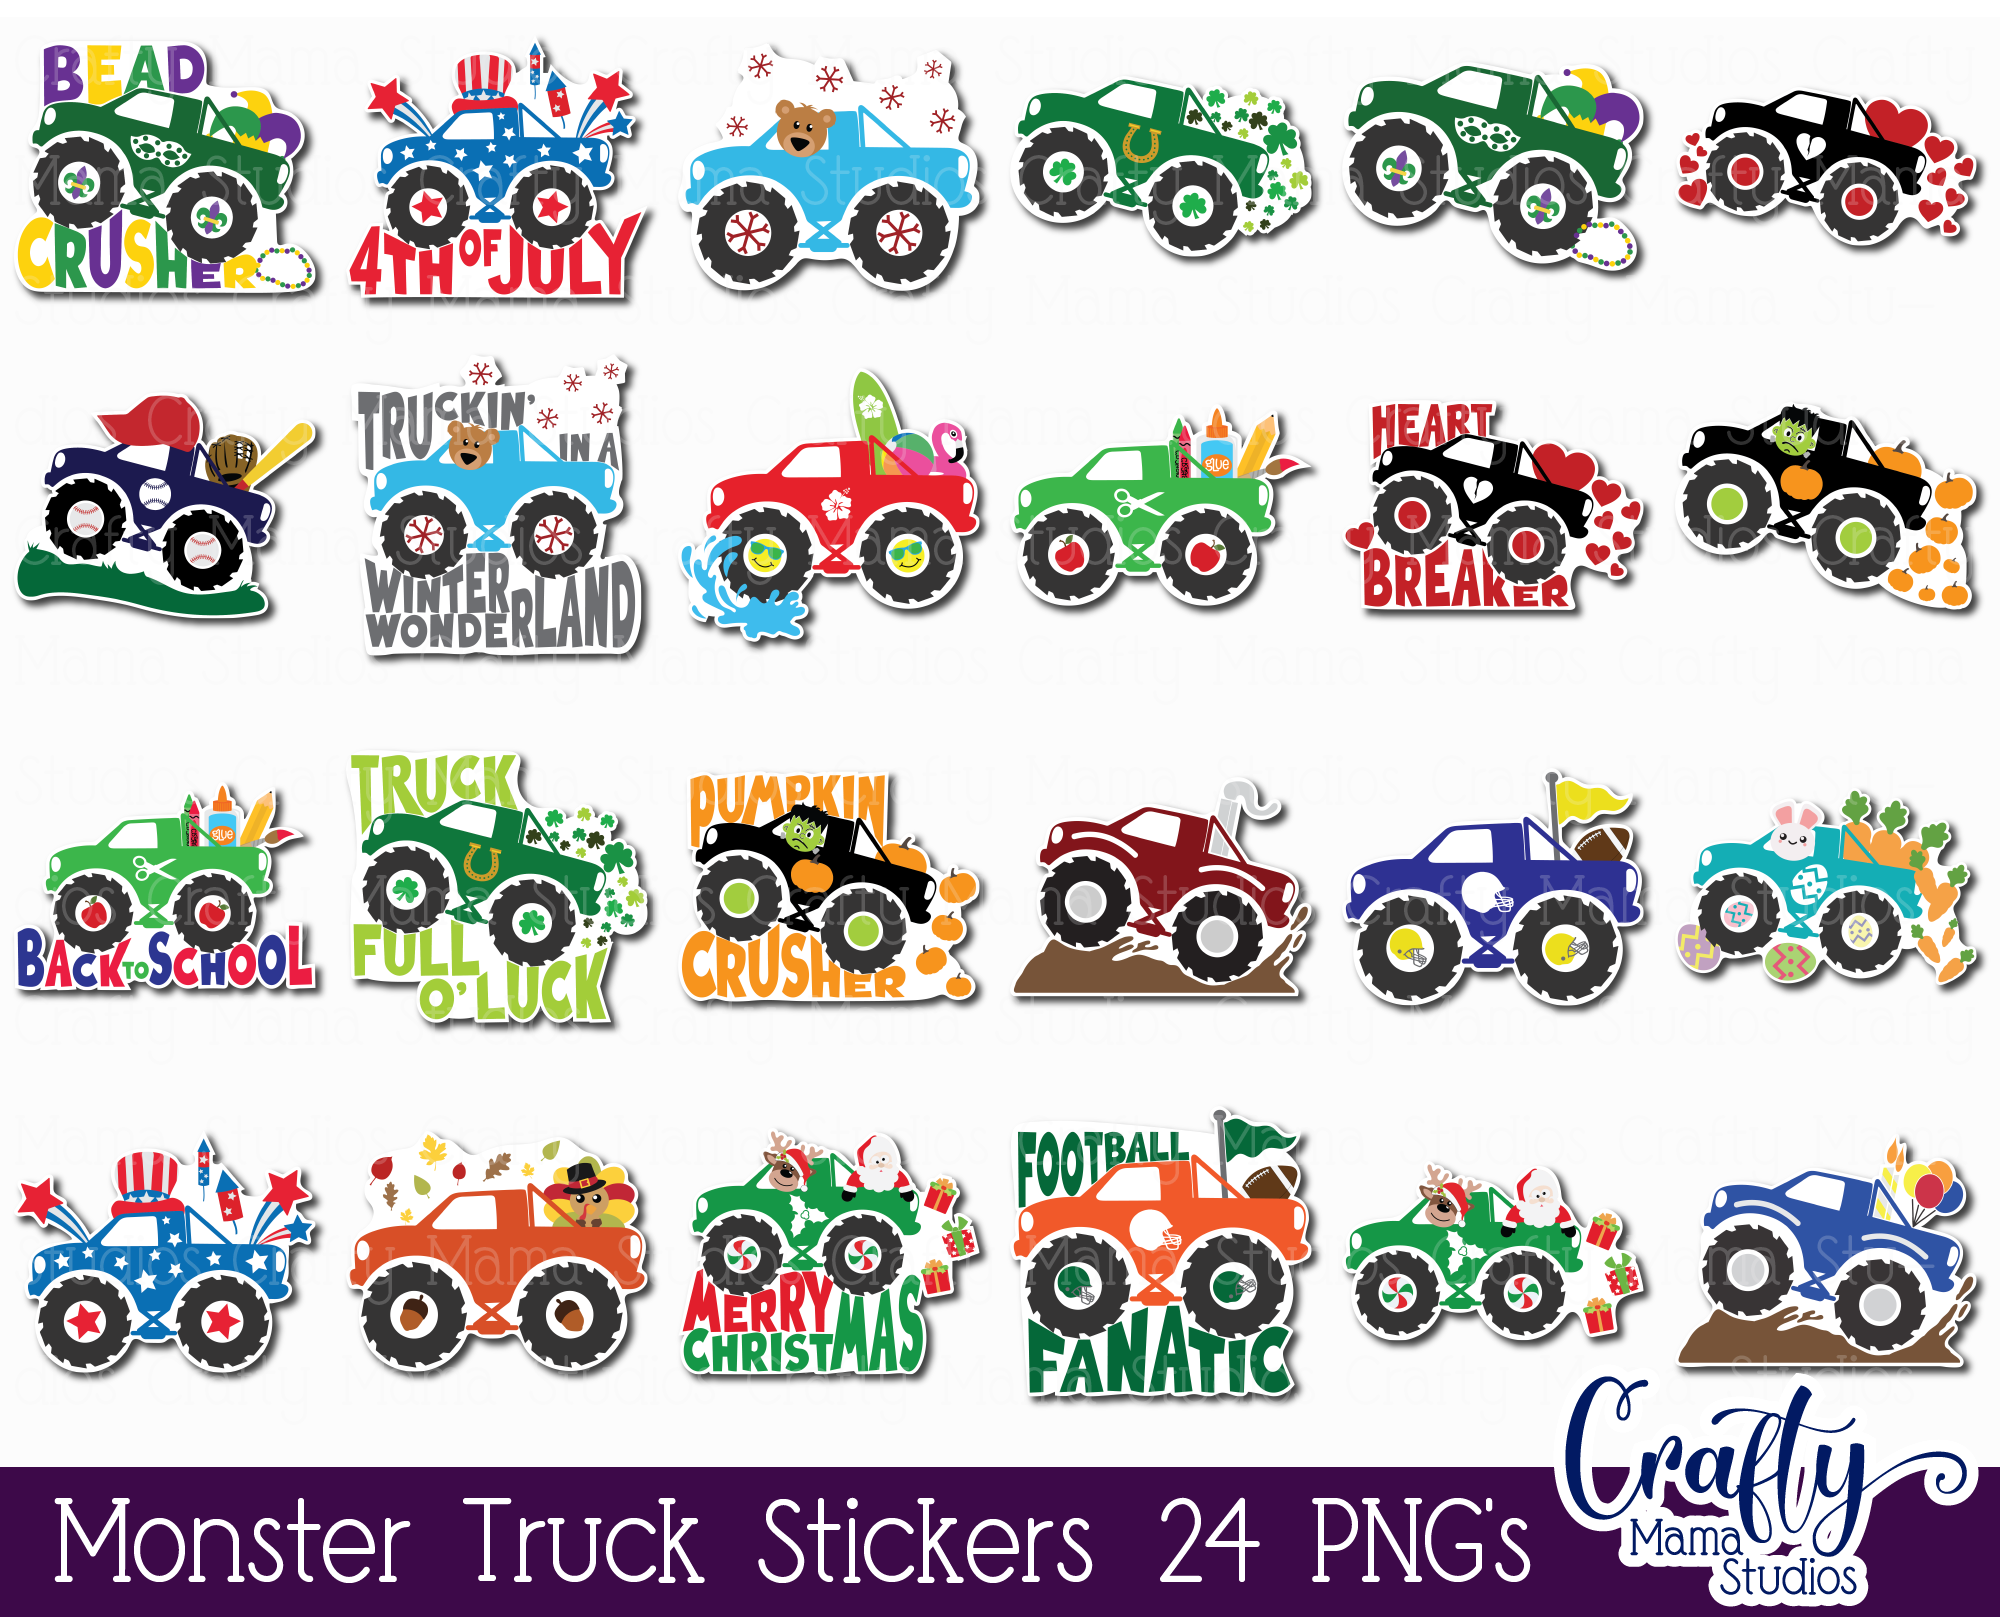 Monster truck nail stickers - wide 2